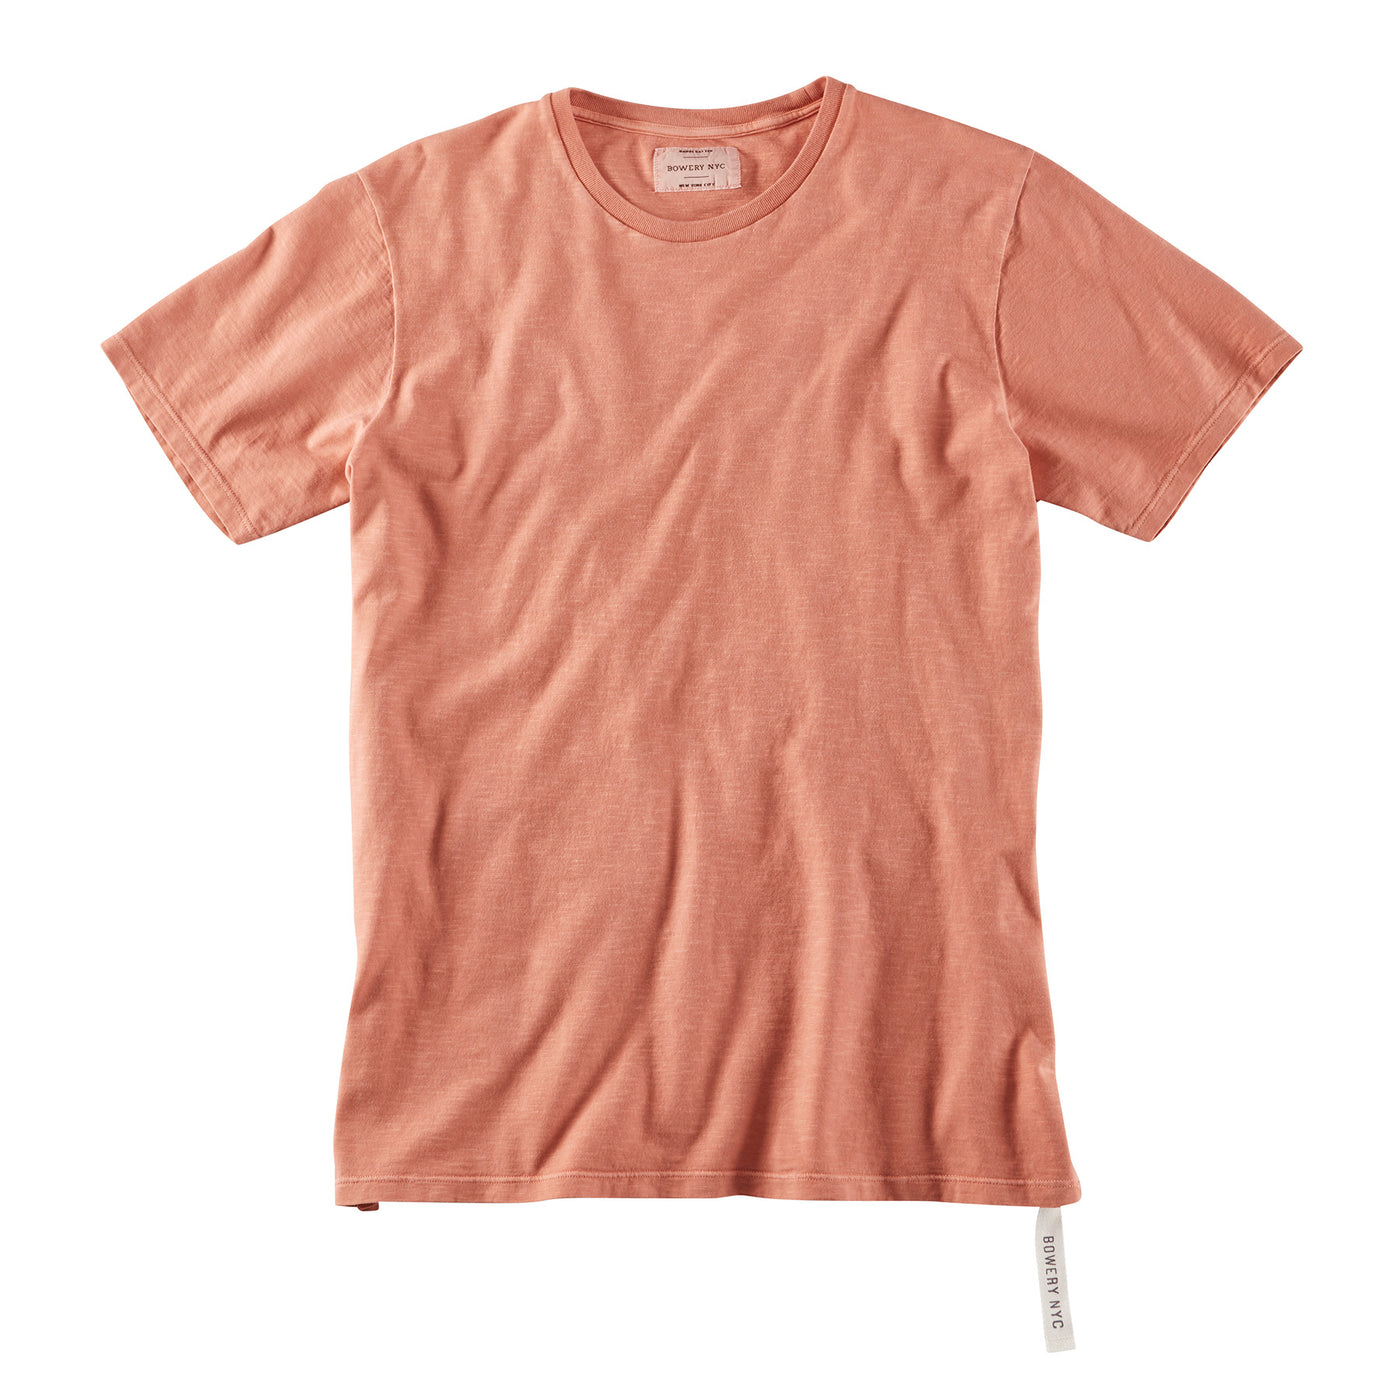 T-shirt Bowery NYC Mousse essentielle